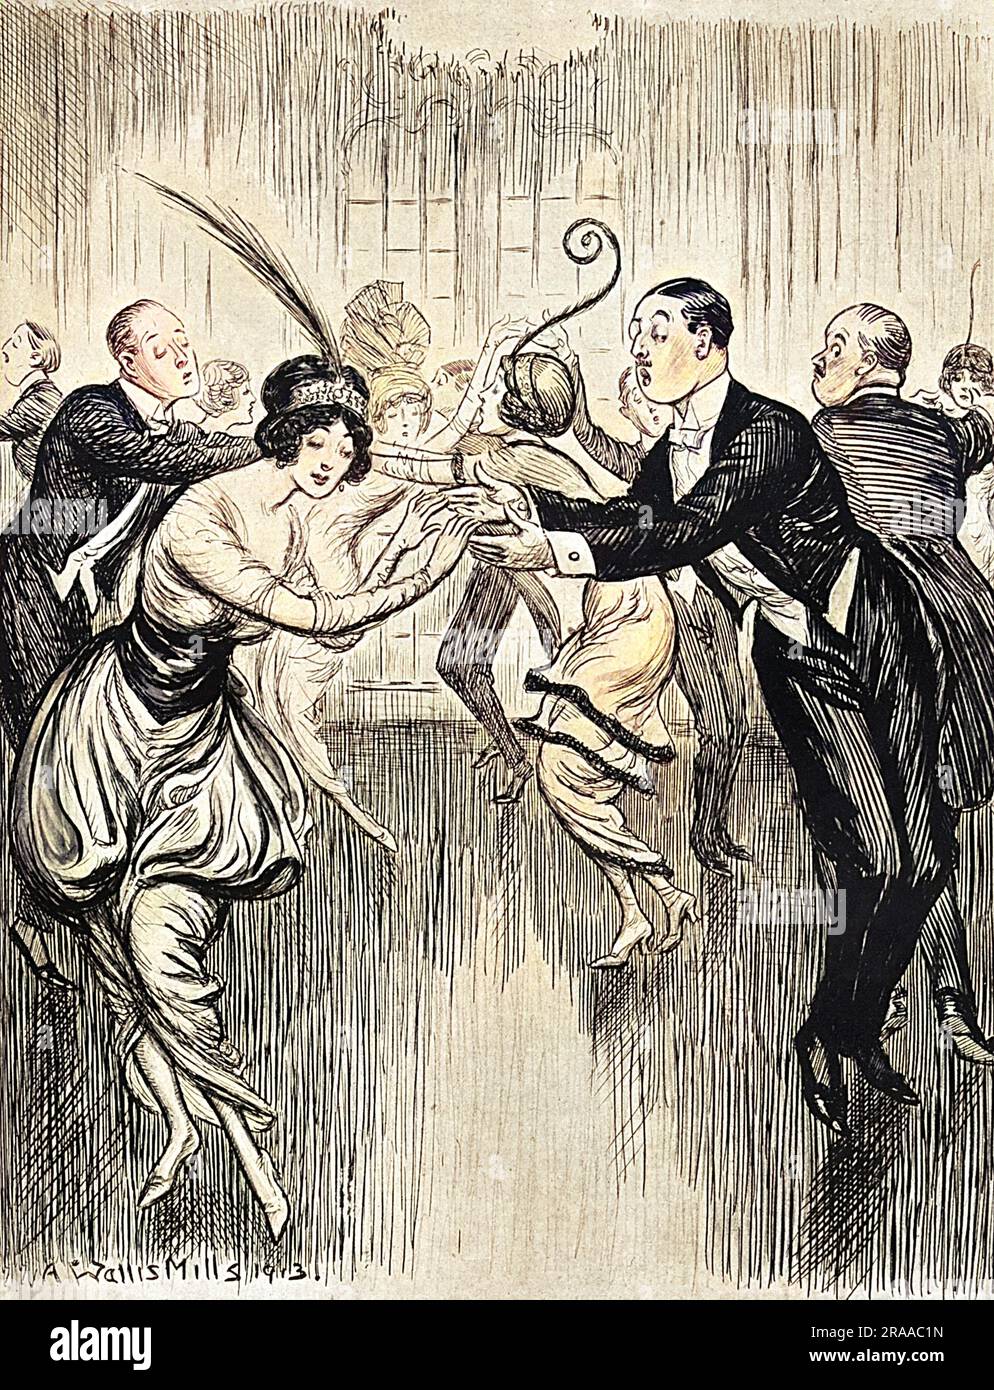 The tango untangled, and made suitable for use in British ballrooms. The Bystander imagines a sanitised version of the tango, suitable for dancing in respectable British ballrooms, with minimum physical contact.     Date: 1913 Stock Photo